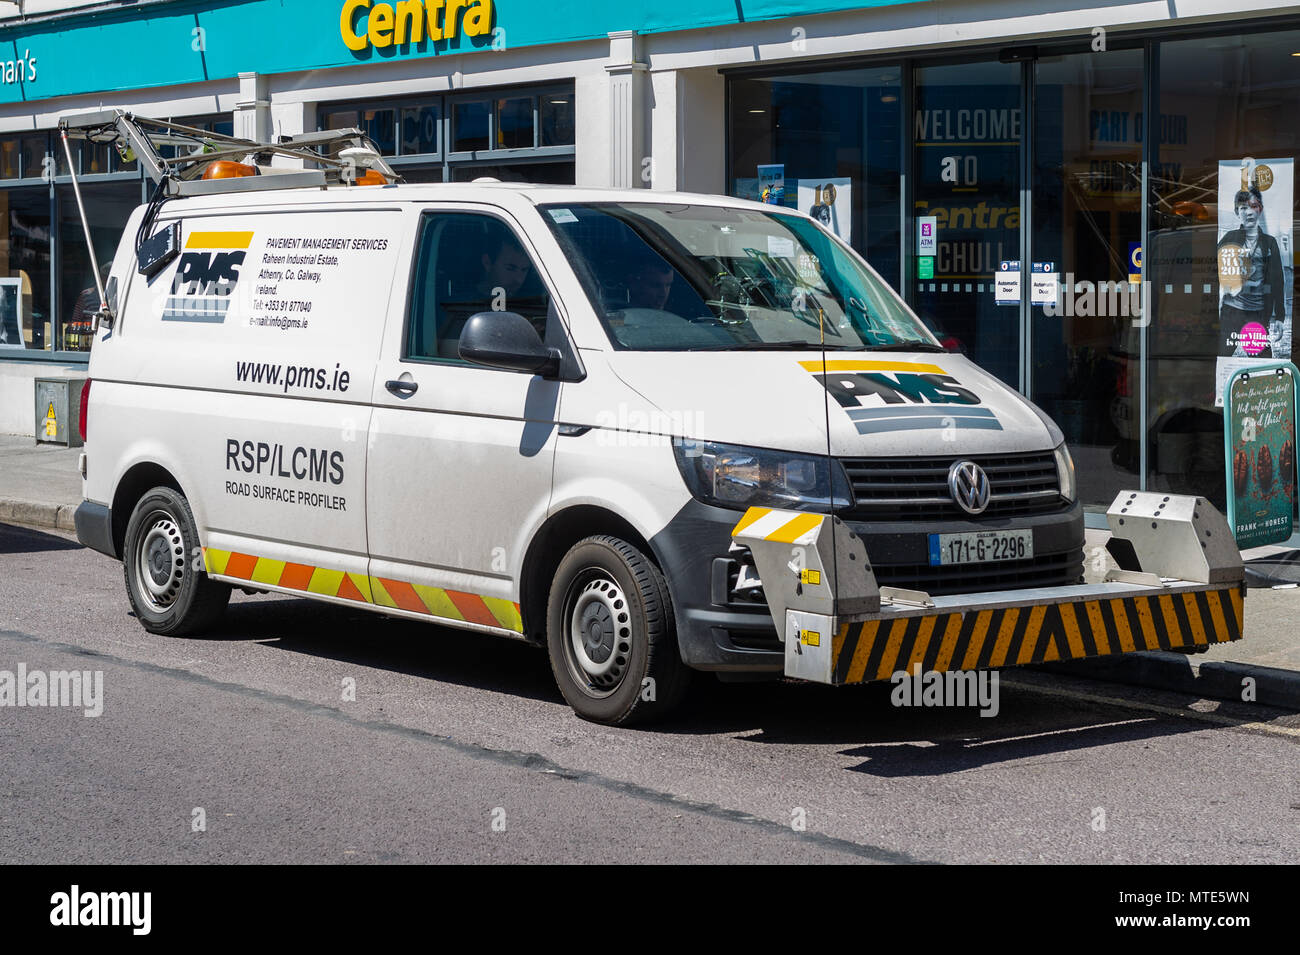 Road surface profiling vehicle parked outside Centra supermarket in Schull, West Cork, Ireland. Stock Photo